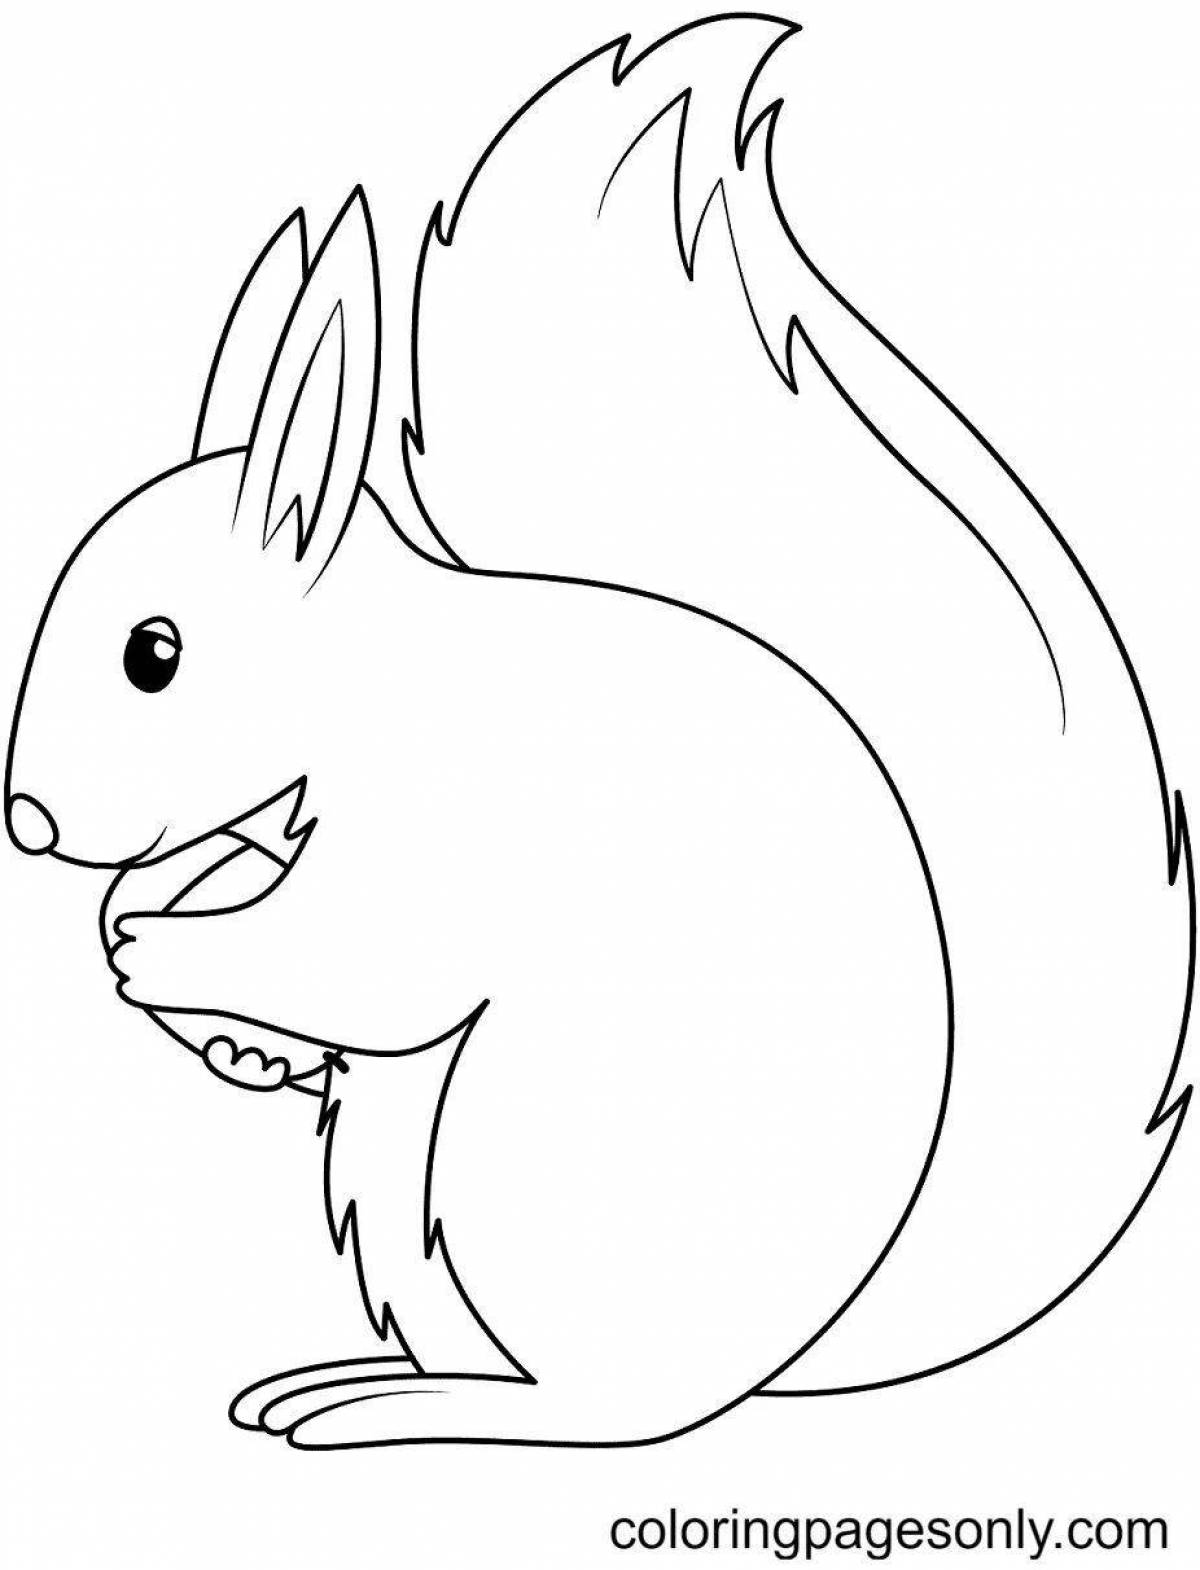 Playful squirrel coloring book for 3-4 year olds